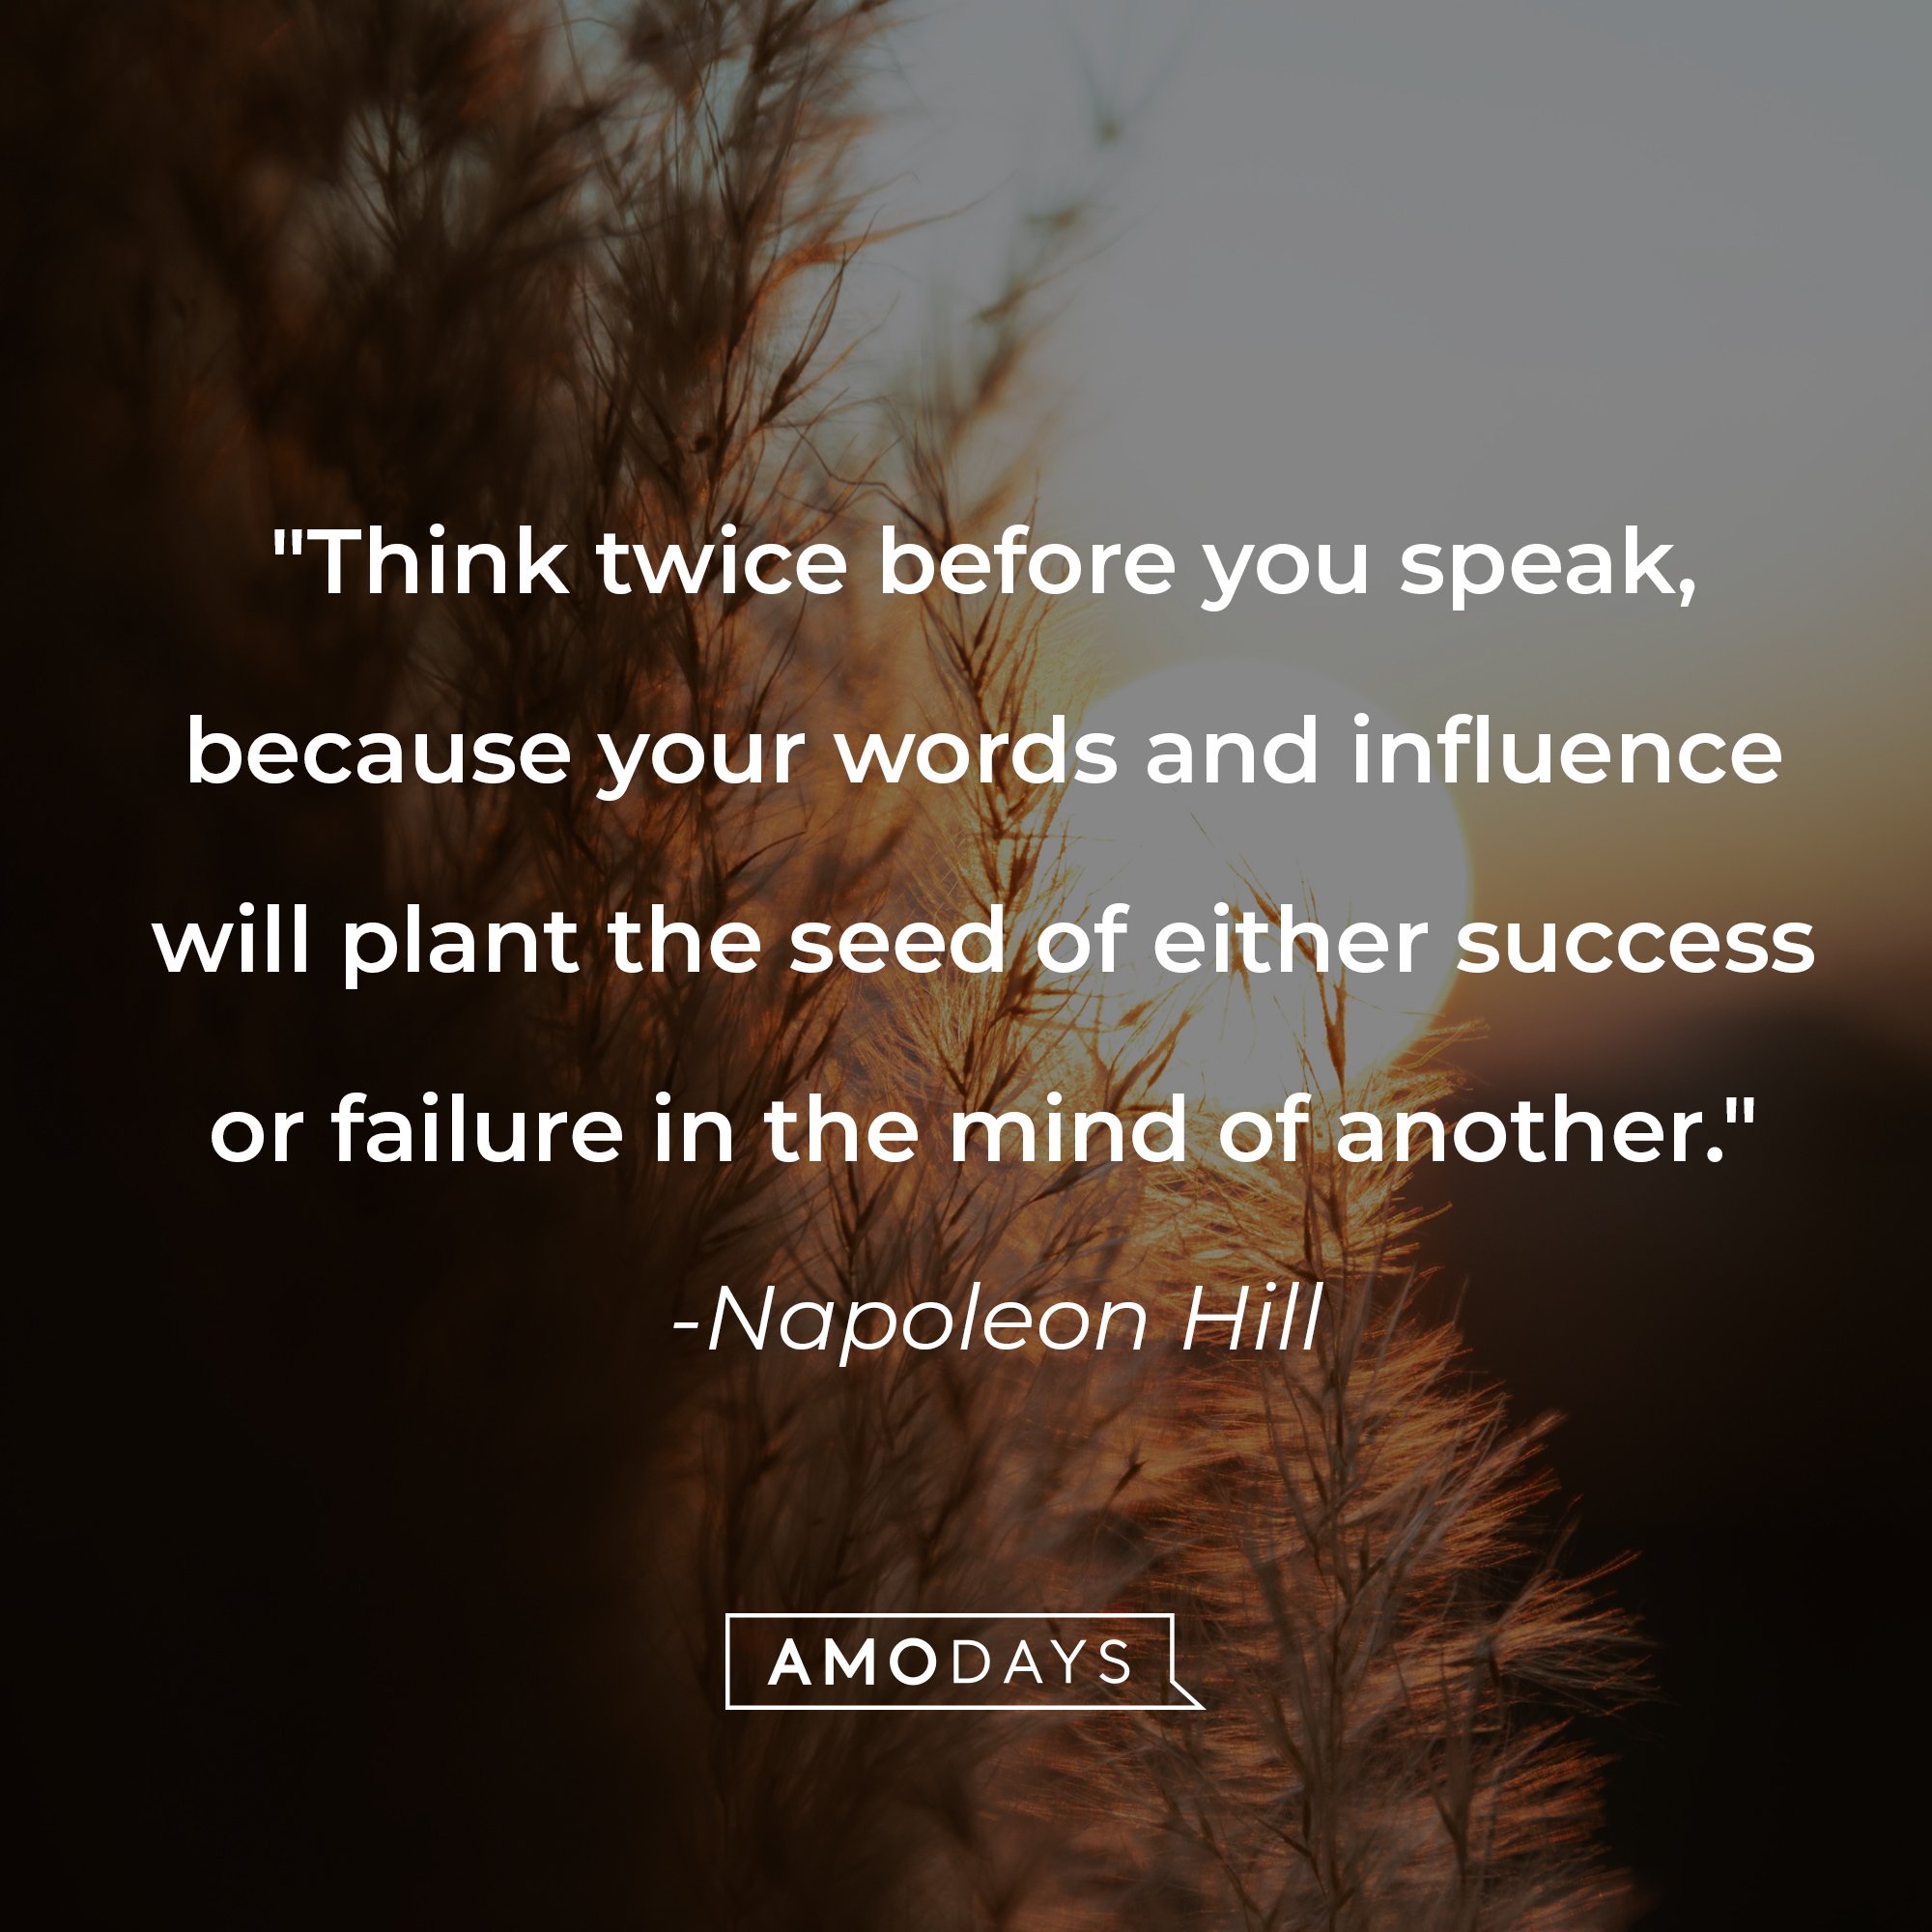 Napoleon Hill's quote: "Think twice before you speak, because your words and influence will plant the seed of either success or failure in the mind of another." | Image: AmoDays